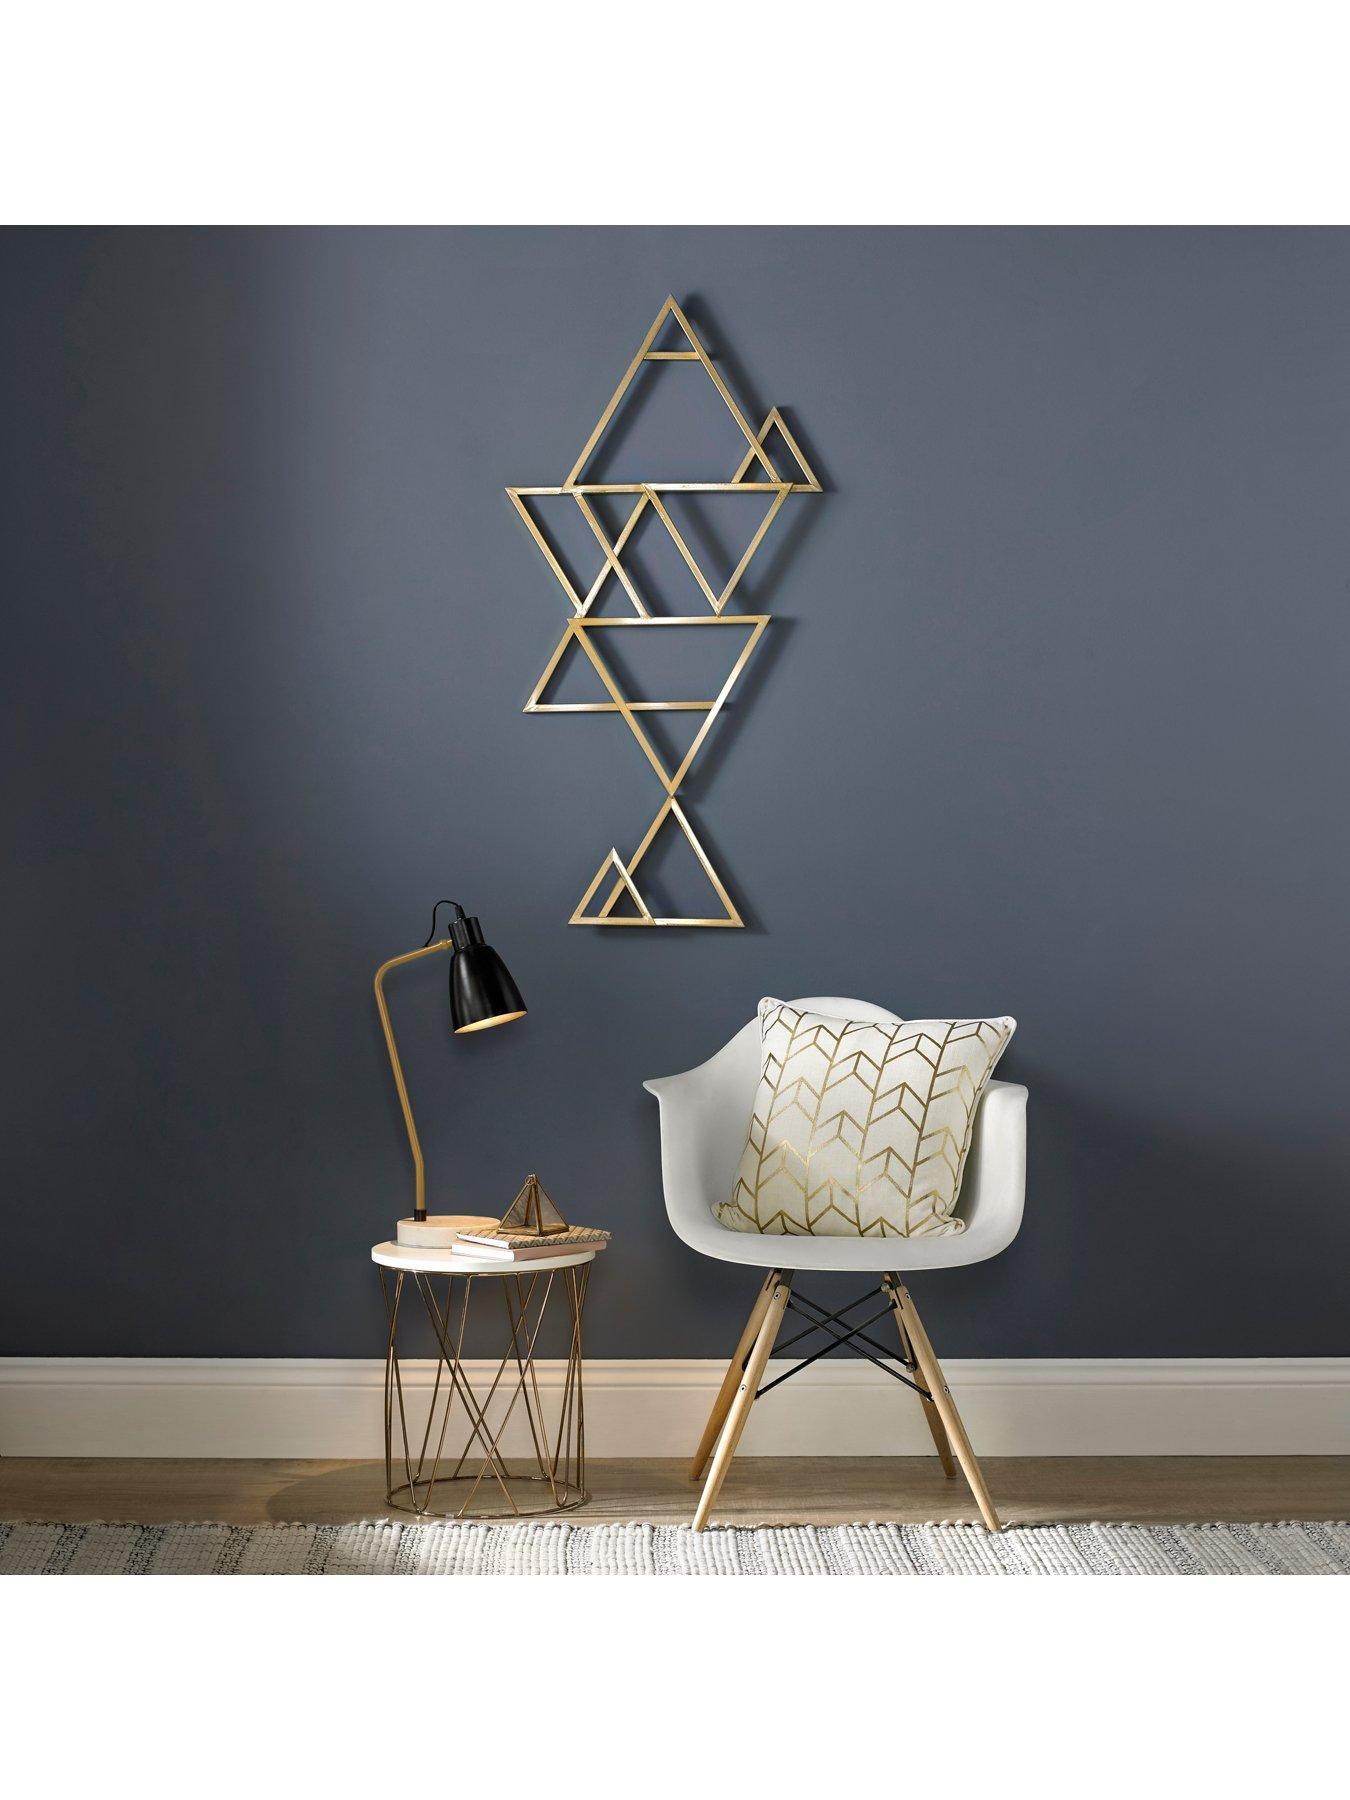 Gold abstract geo wall art - home accessories inspiration| Today we're talking inspiration for adding green to your living room. Green is a really versatile colour to decorate your home with. But, which colours and tones work well? What kind of accessories work with green? This post gives you ideas for pulling together an elegant green colour palette and pieces for your home. Read more: kittyandb.com #homeaccessories #geo #goldandwhite #wallart #interiordecoratinginspiration